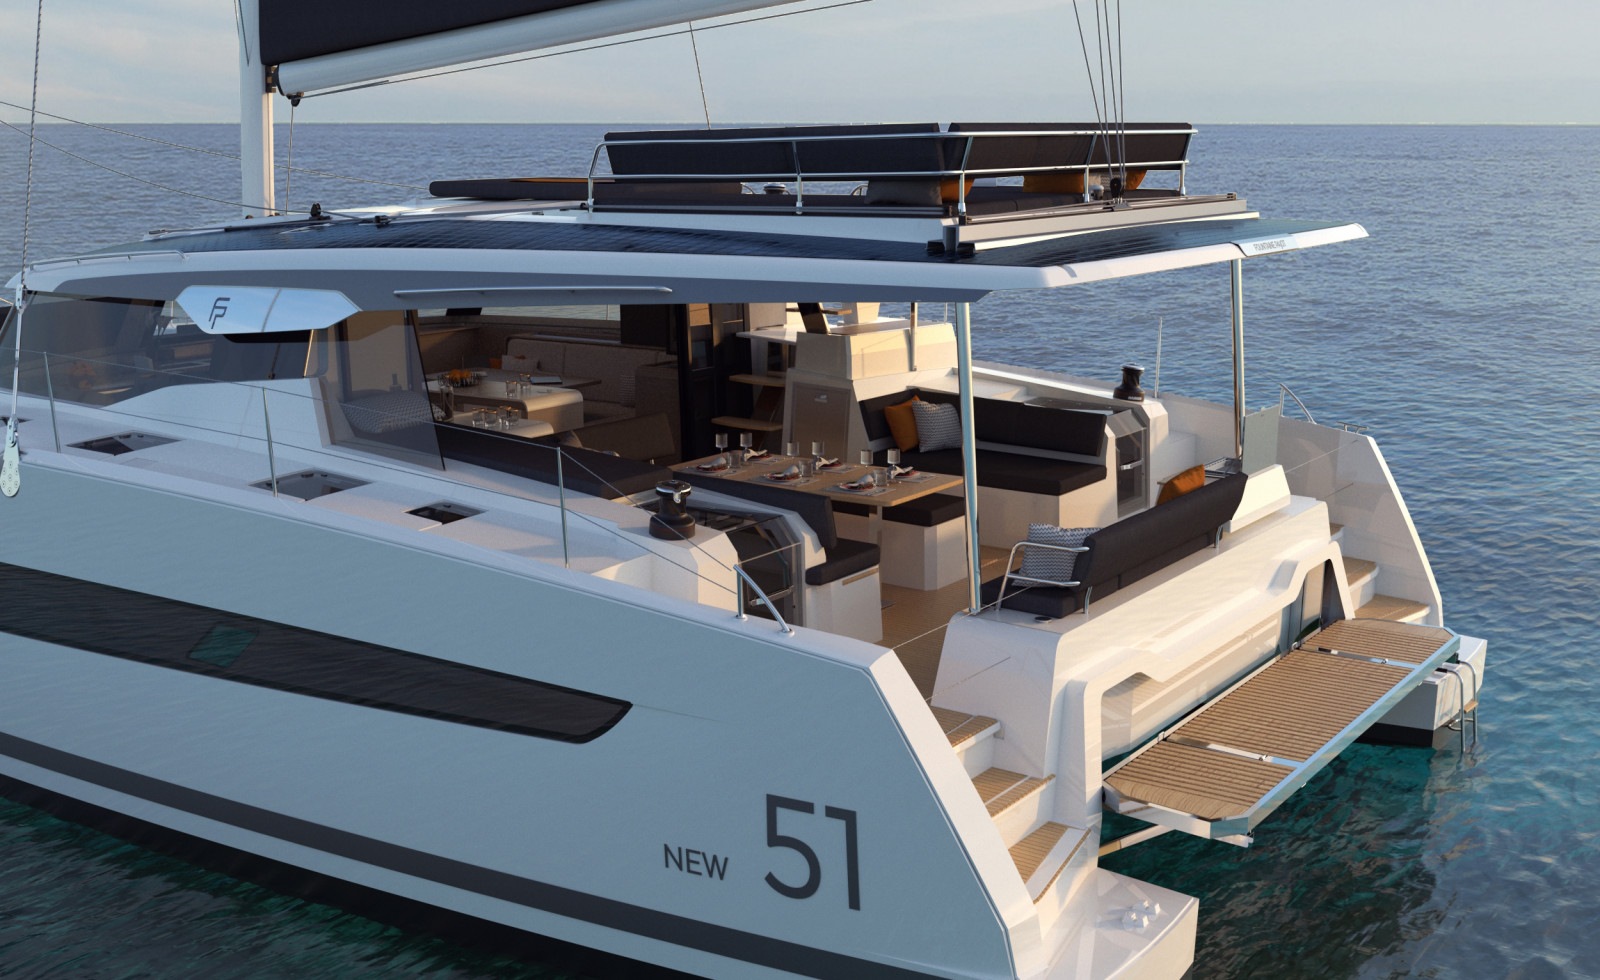 Fountaine Pajot reveals the first images of the New 51